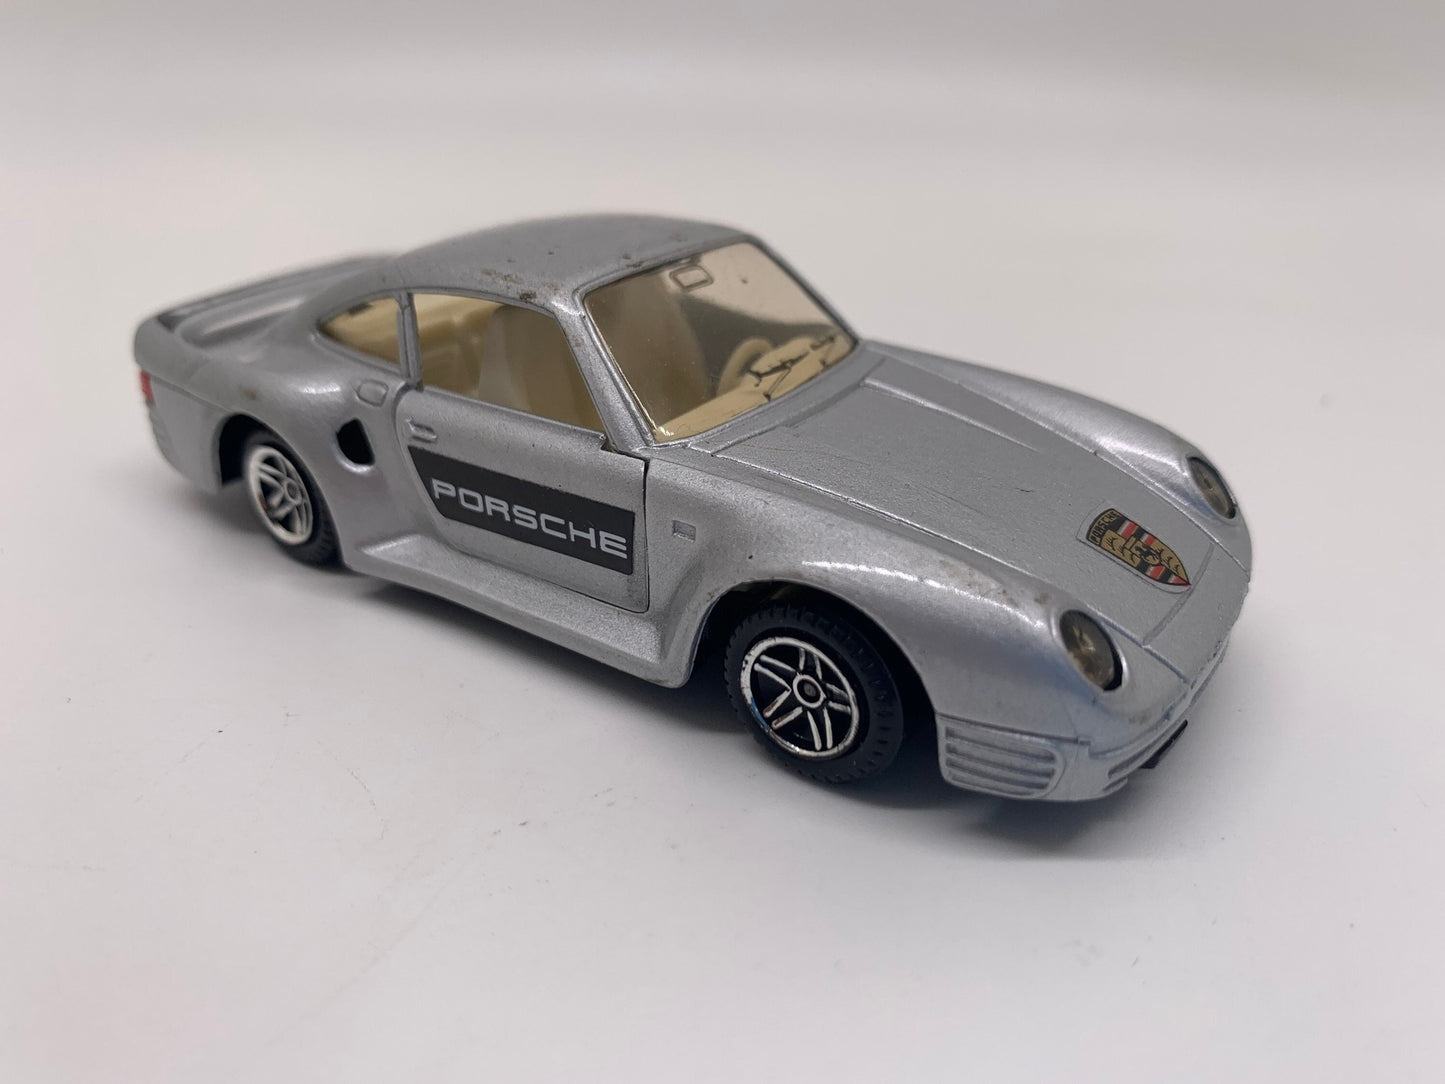 Guisval Porsche 959 Silver Perfect Birthday Gift Collectable Scale Model Toy Car